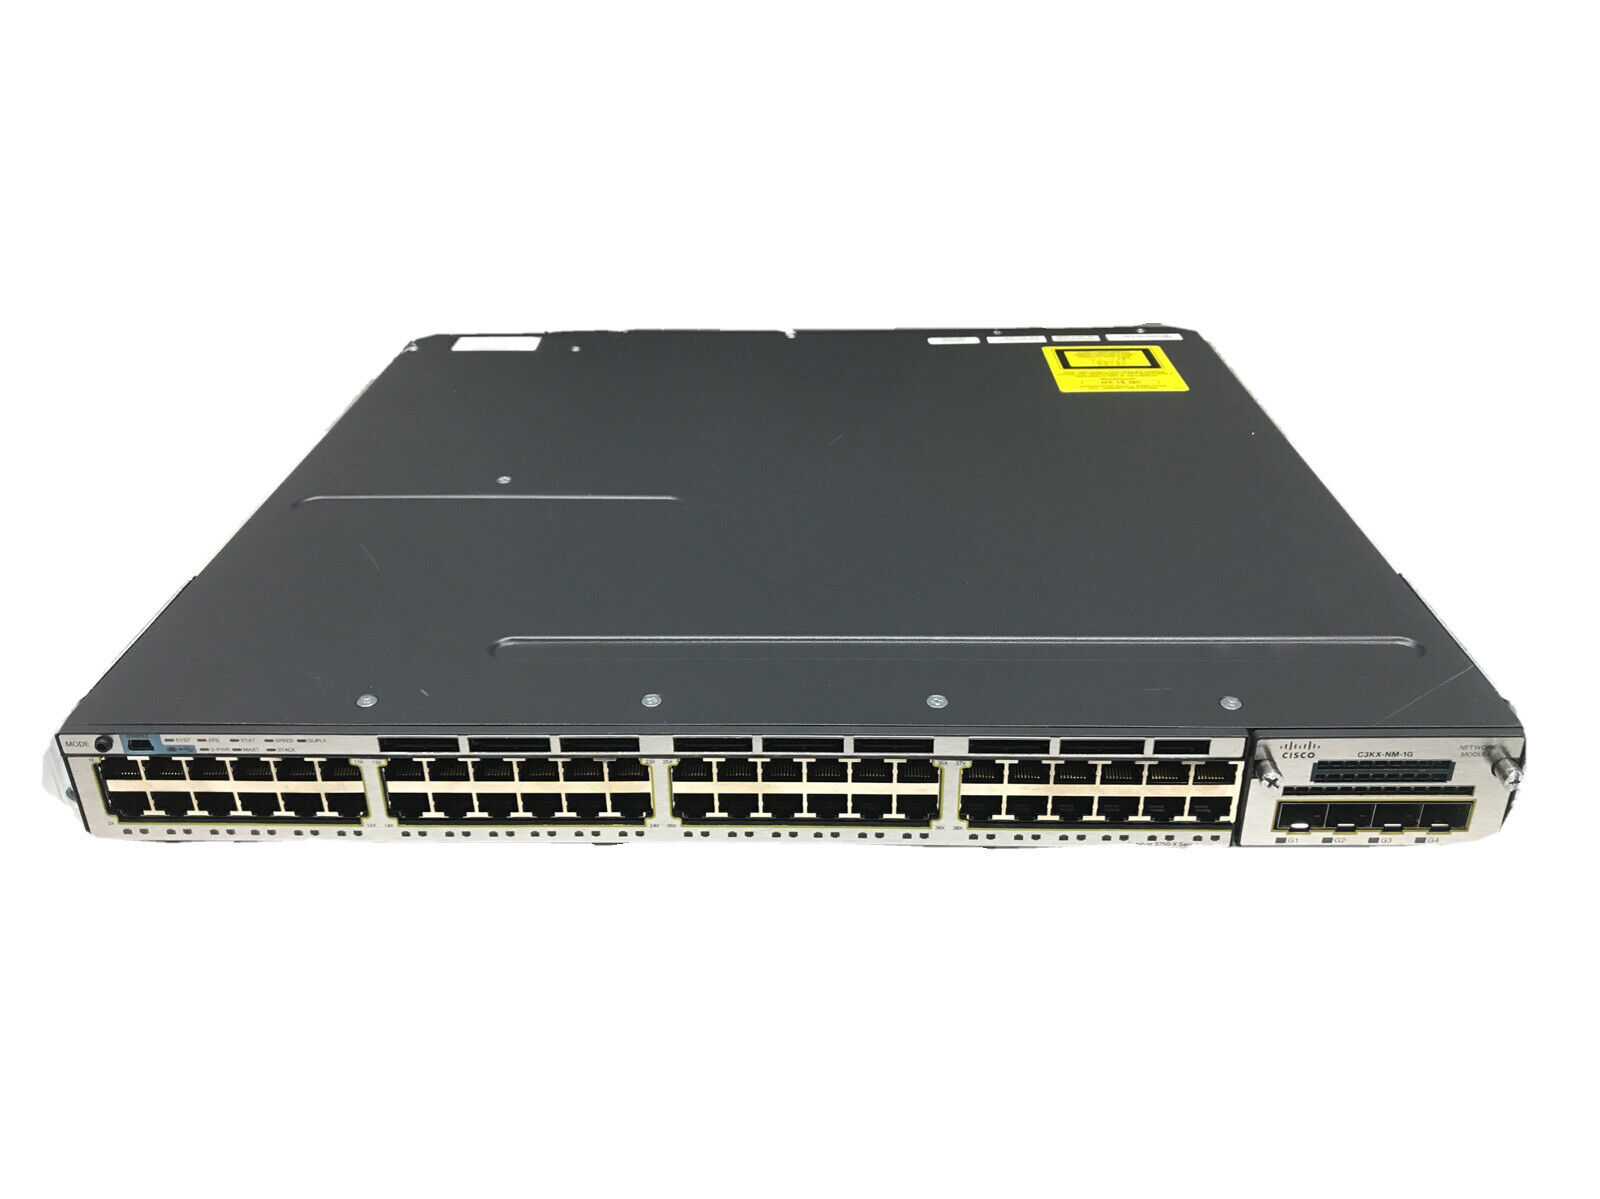 Cisco Catalyst WS-C3750X-48T-S V02 48 Port Switch Tested & Reset GB490